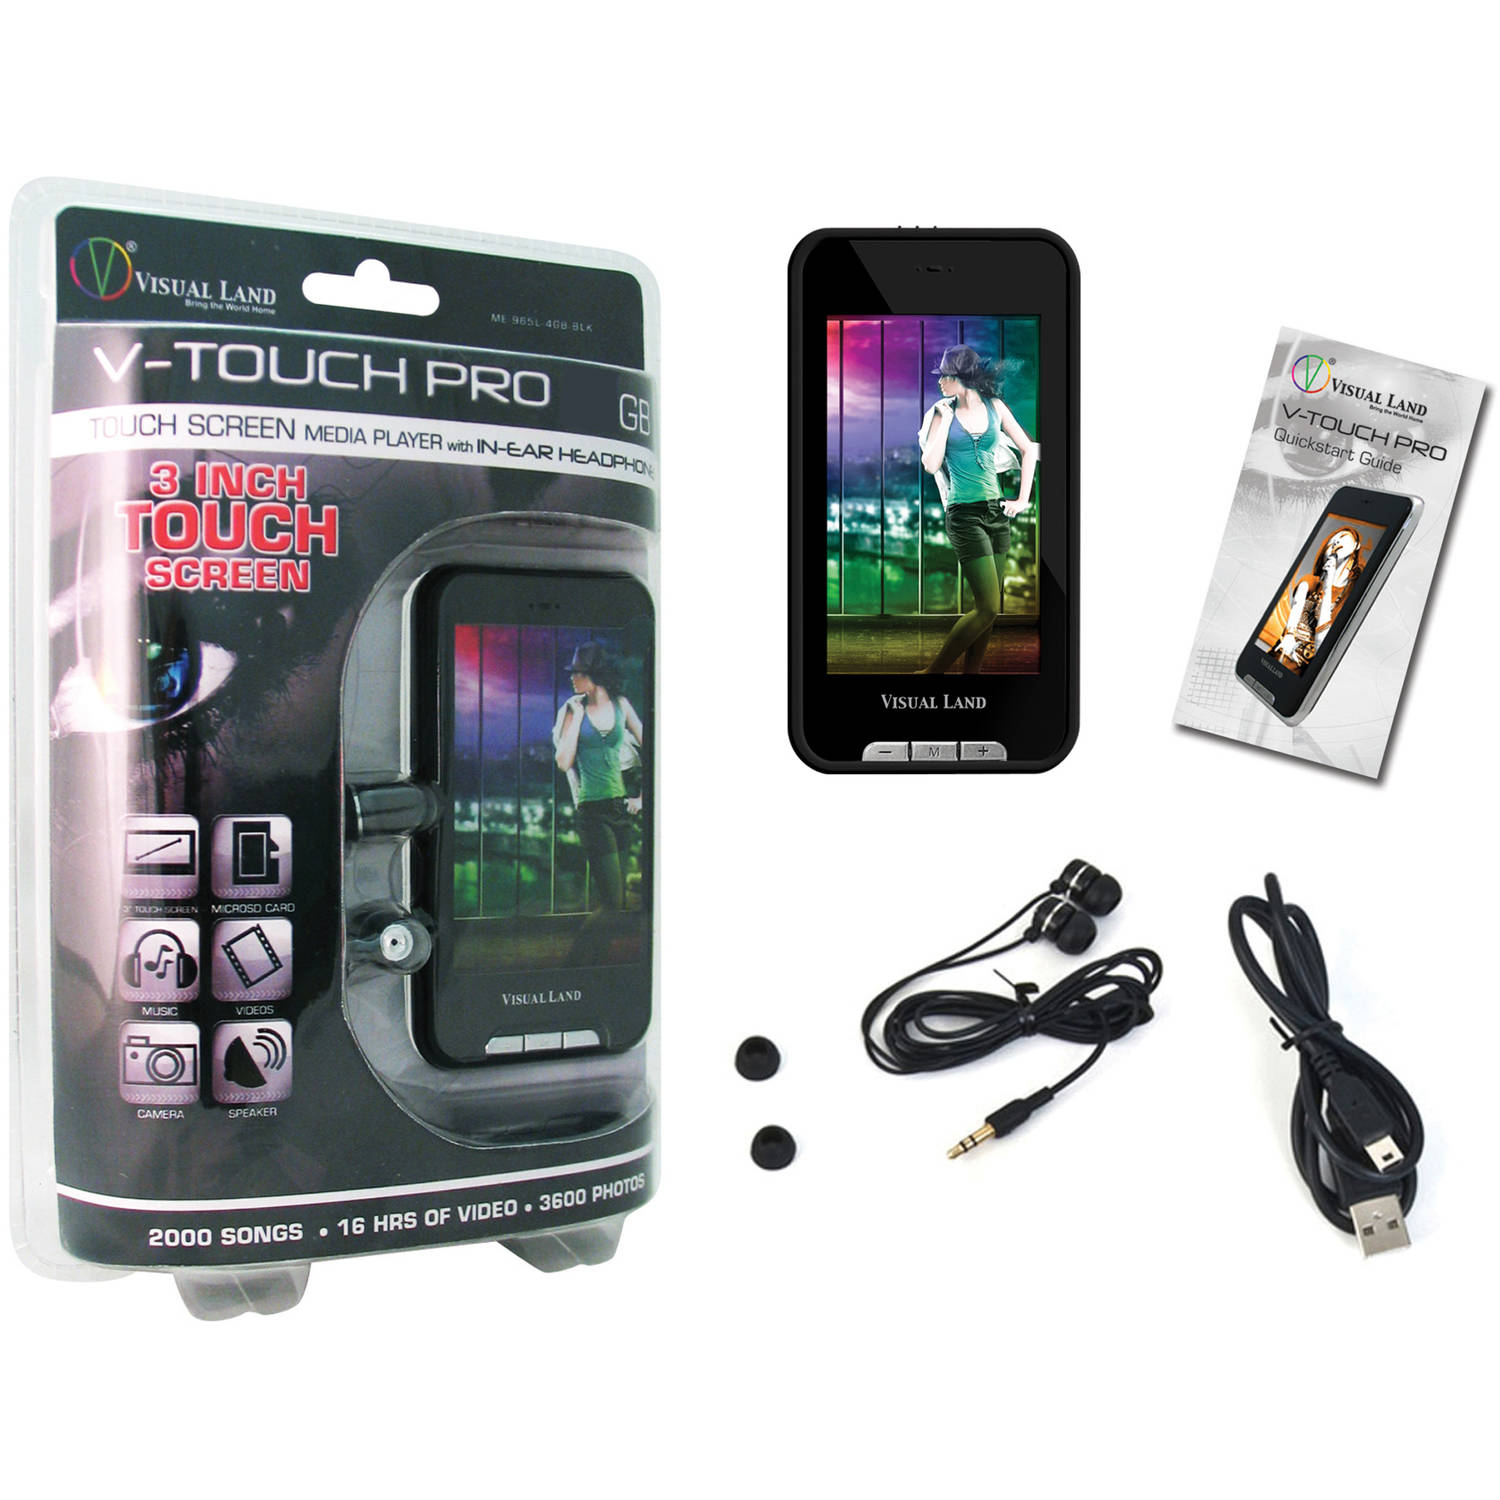 Visual Land V-Touch Pro 4GB Flash Portable Media Player, Black - image 3 of 3